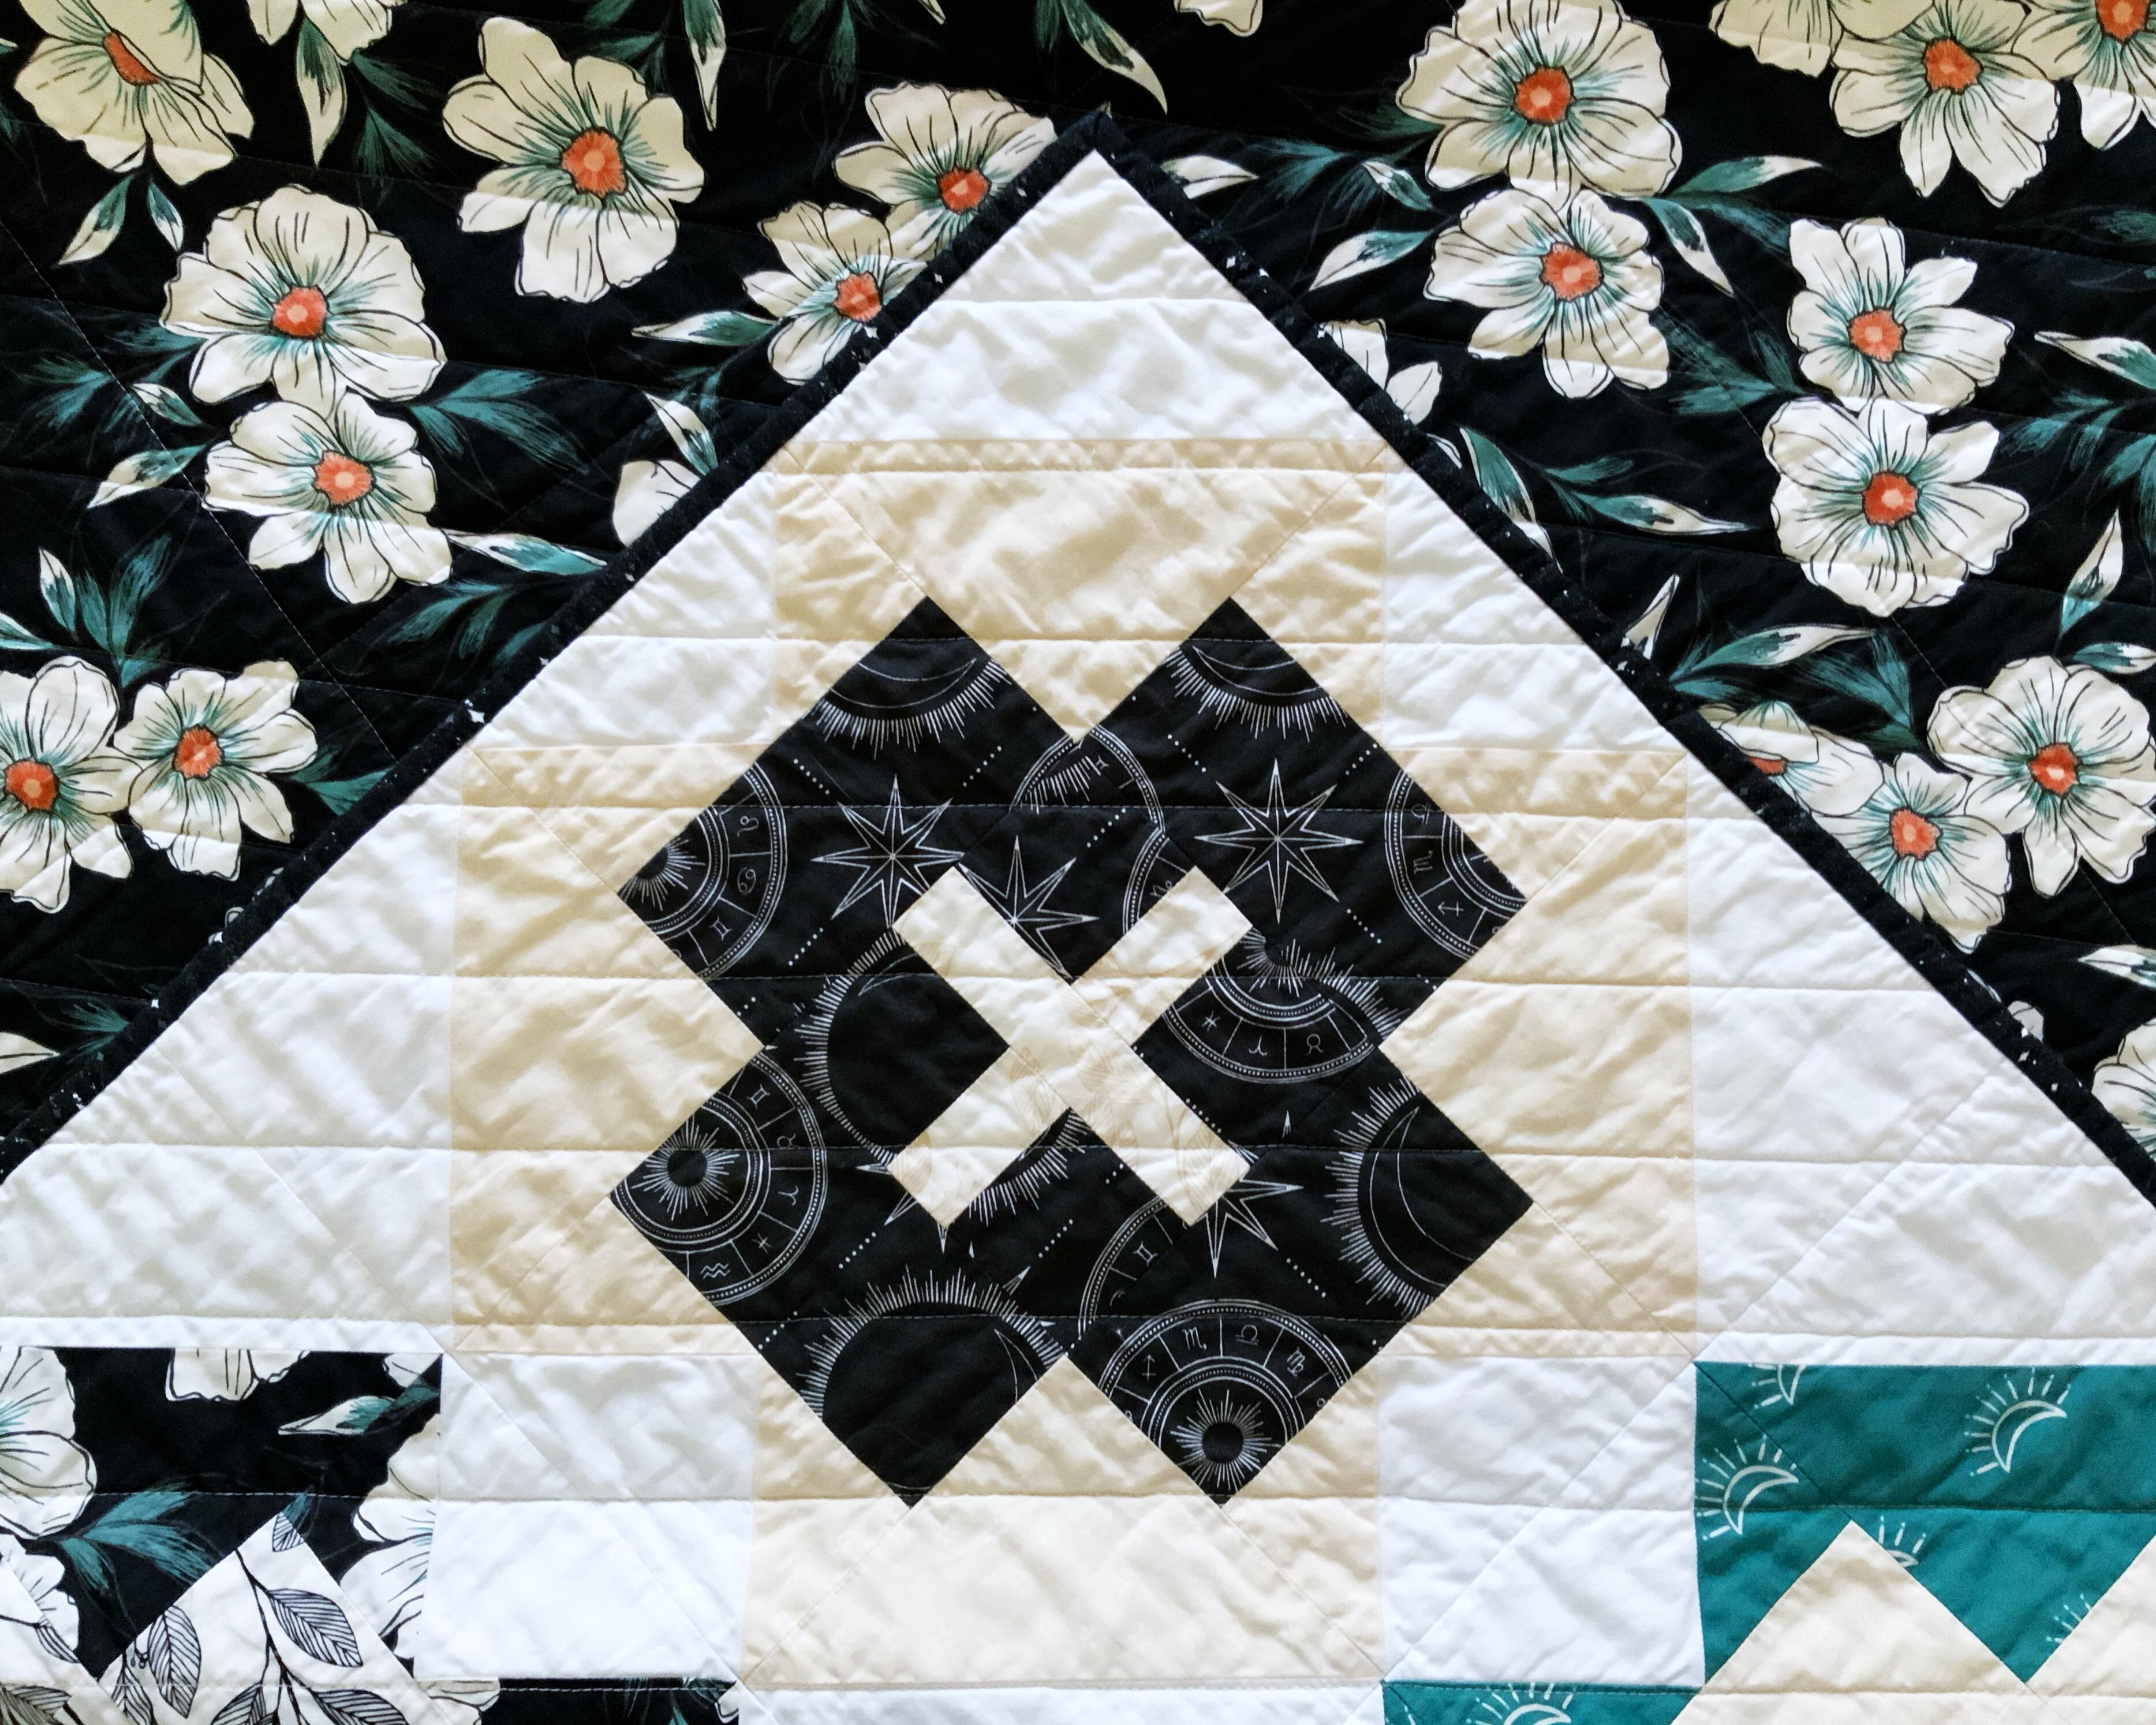 Wildflower Pillow and Baby Quilt Pattern by Missouri Star